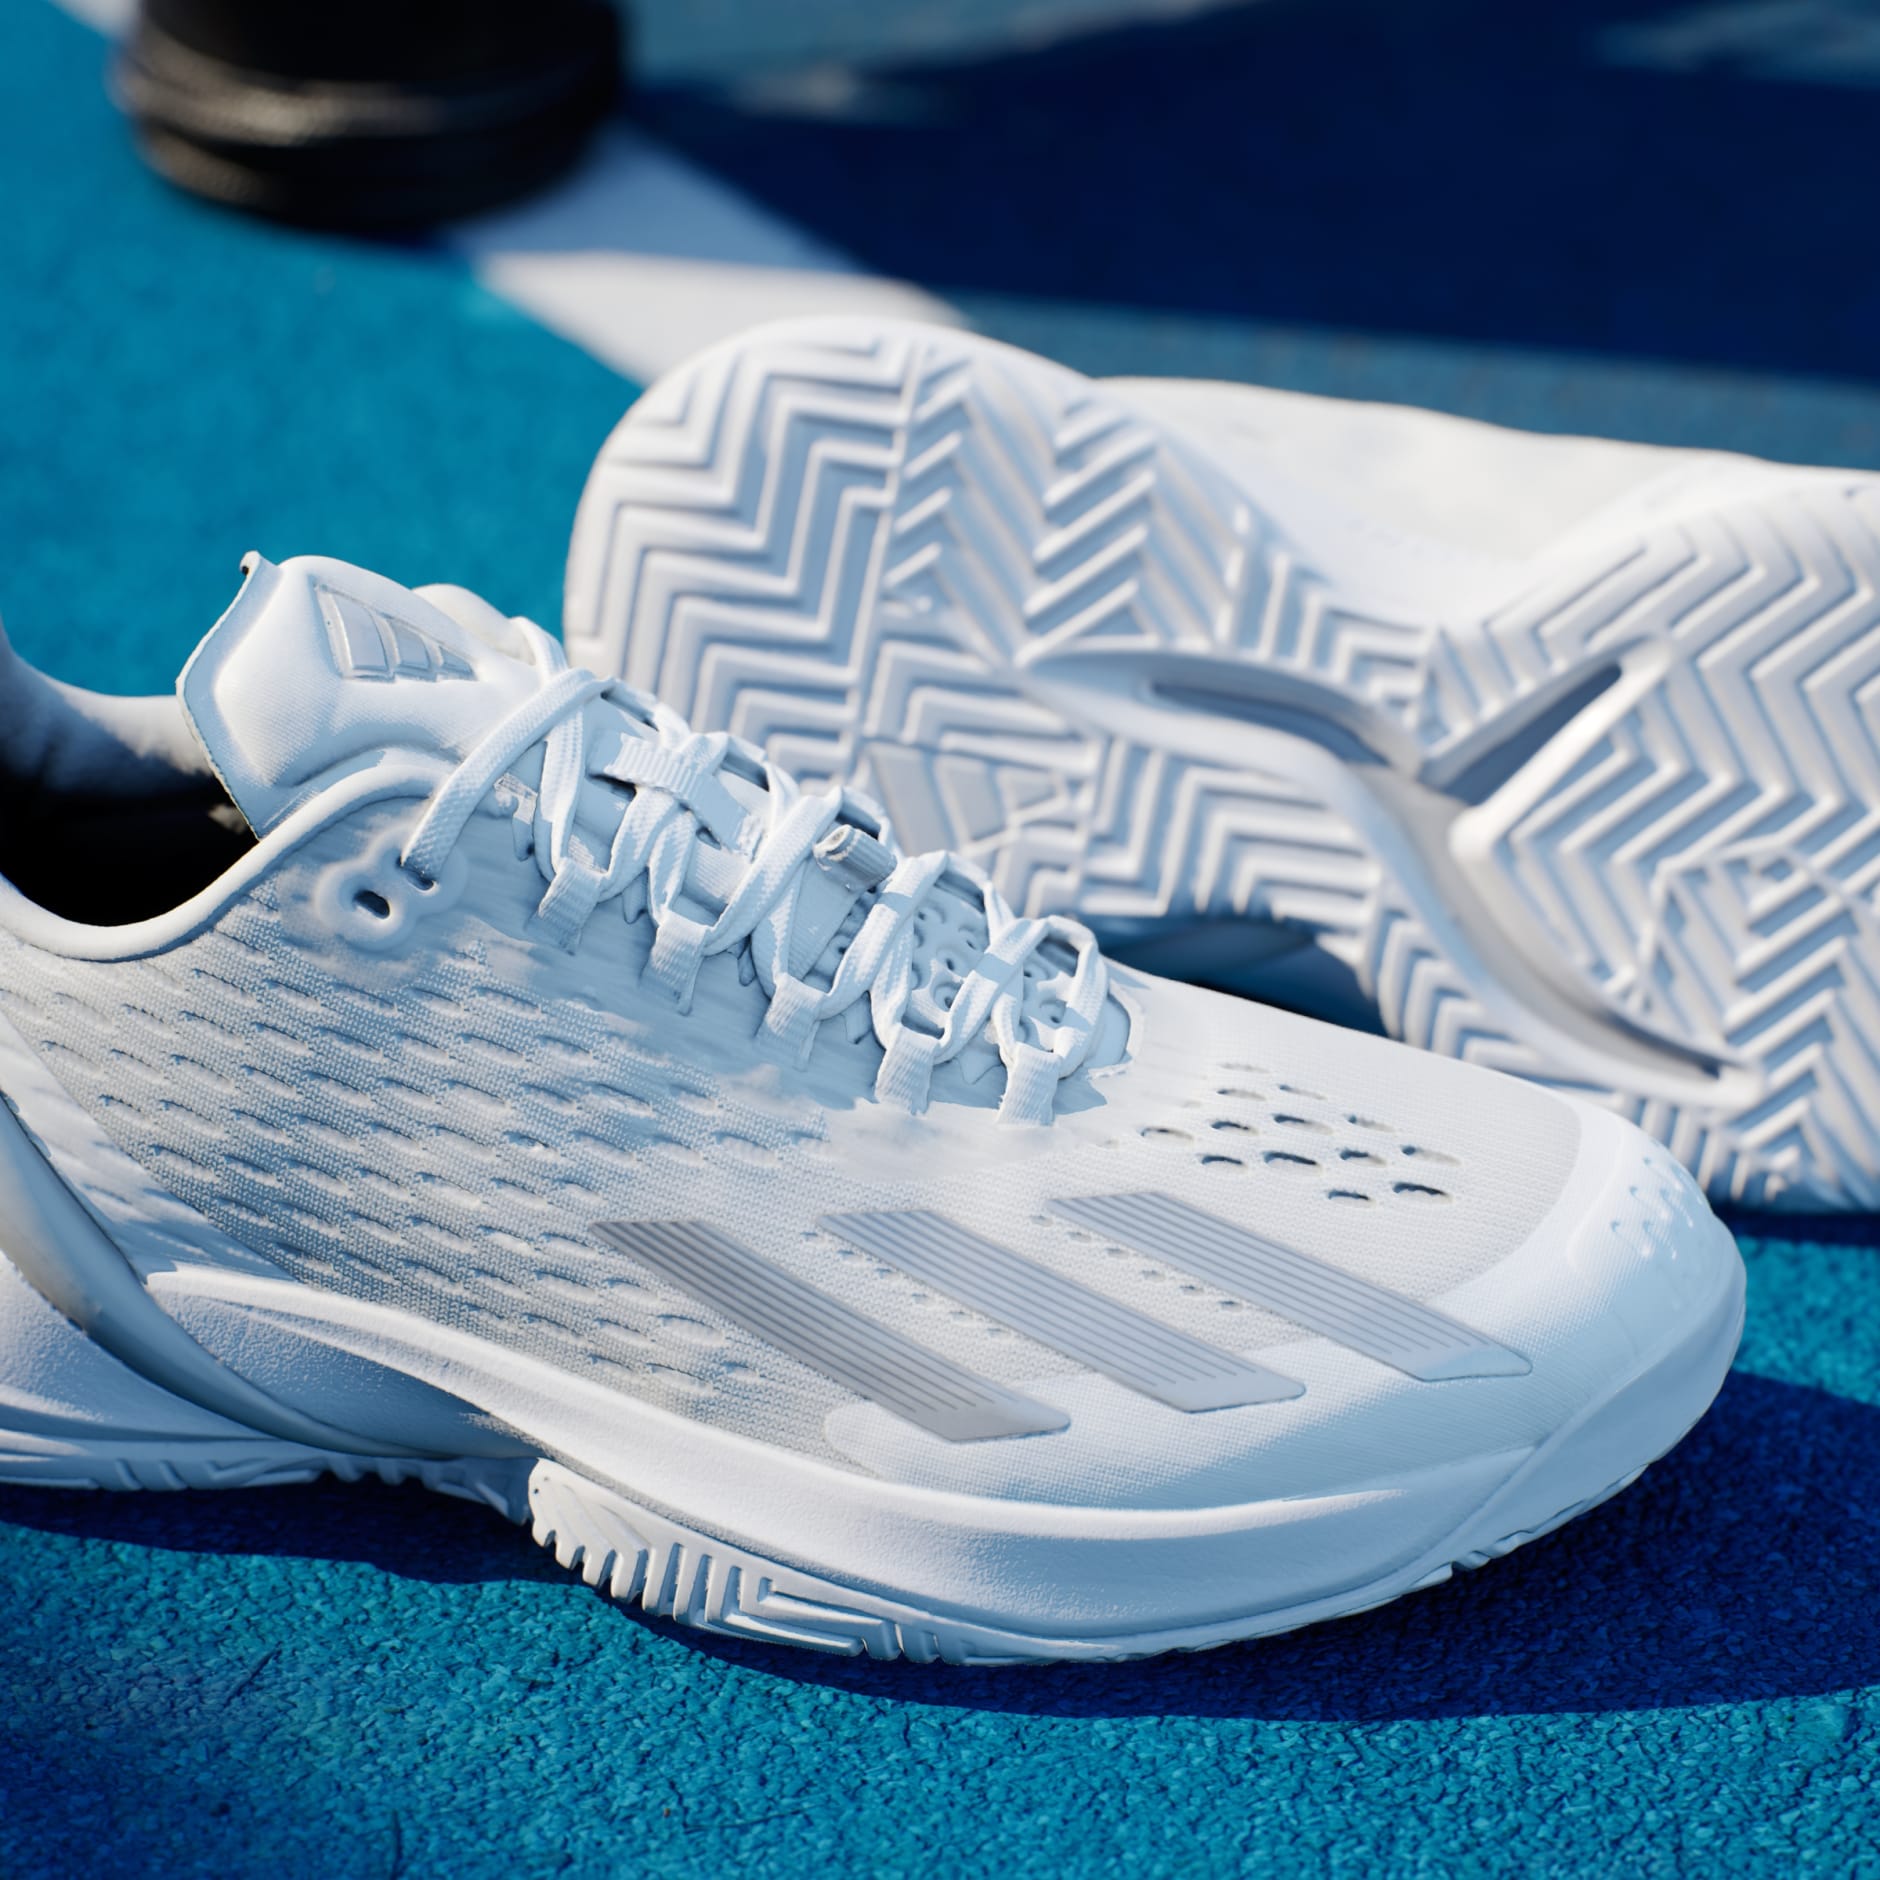 Shoes - adizero Cybersonic Tennis Shoes - White | adidas South Africa